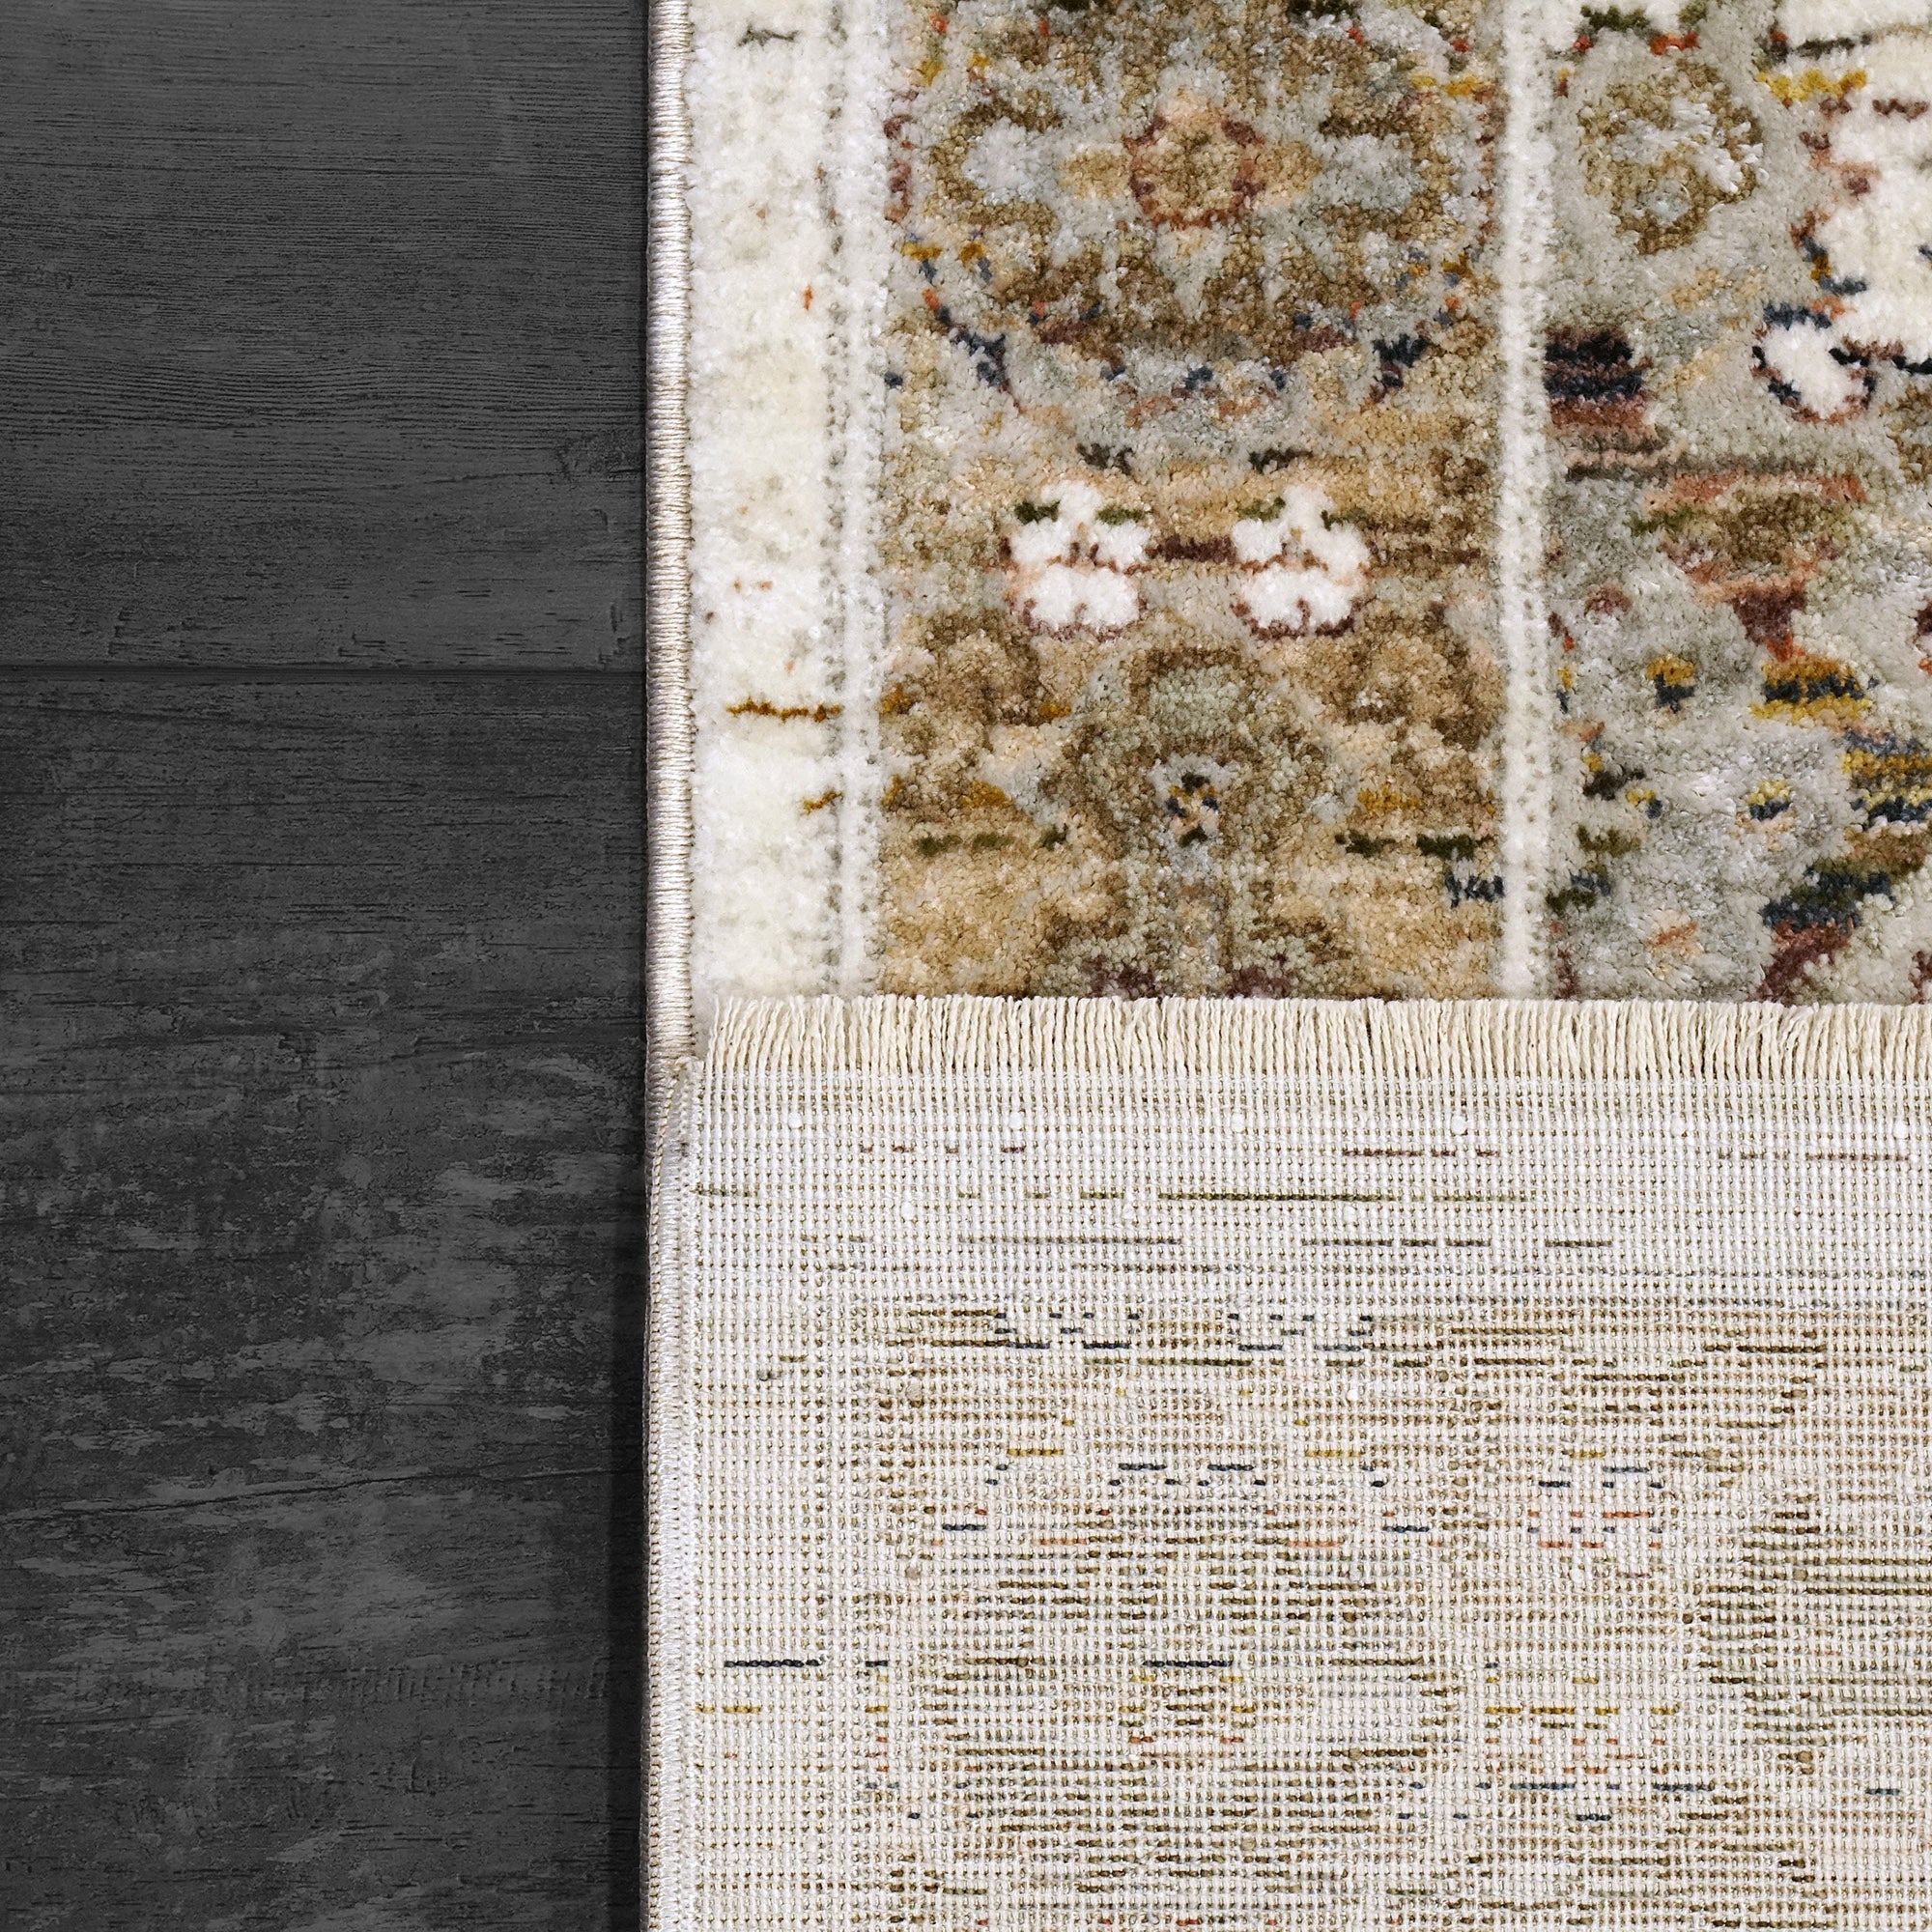 Dynamic Rugs Octo 6903-899 Taupe/Multi Rug